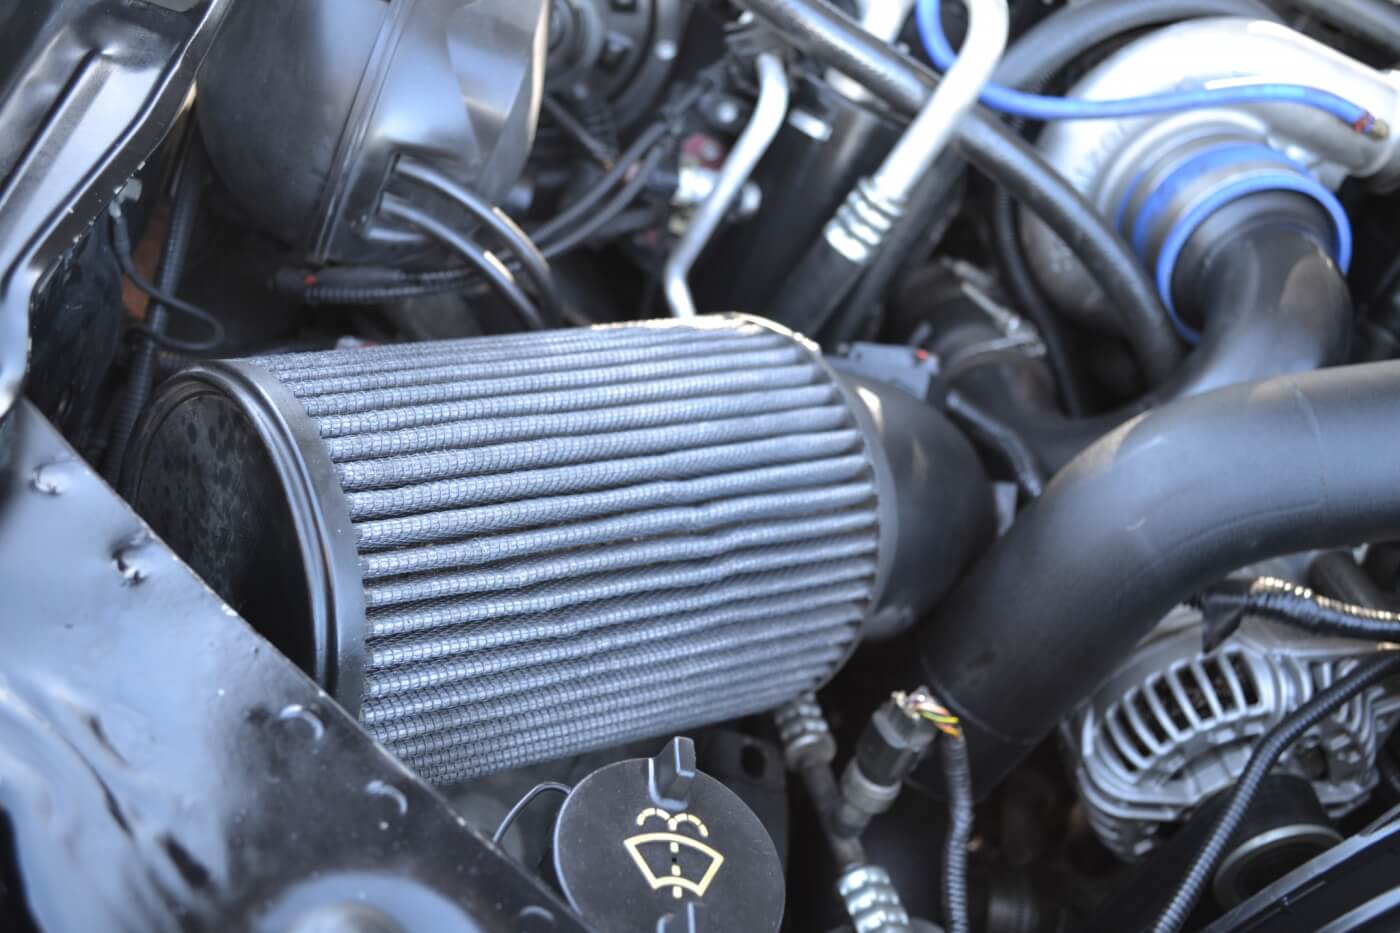 The enormous AFE air filter is the first thing that most people spot when they see the engine, which feeds air to a 75mm S400 turbocharger that has been modified by Destroked. 